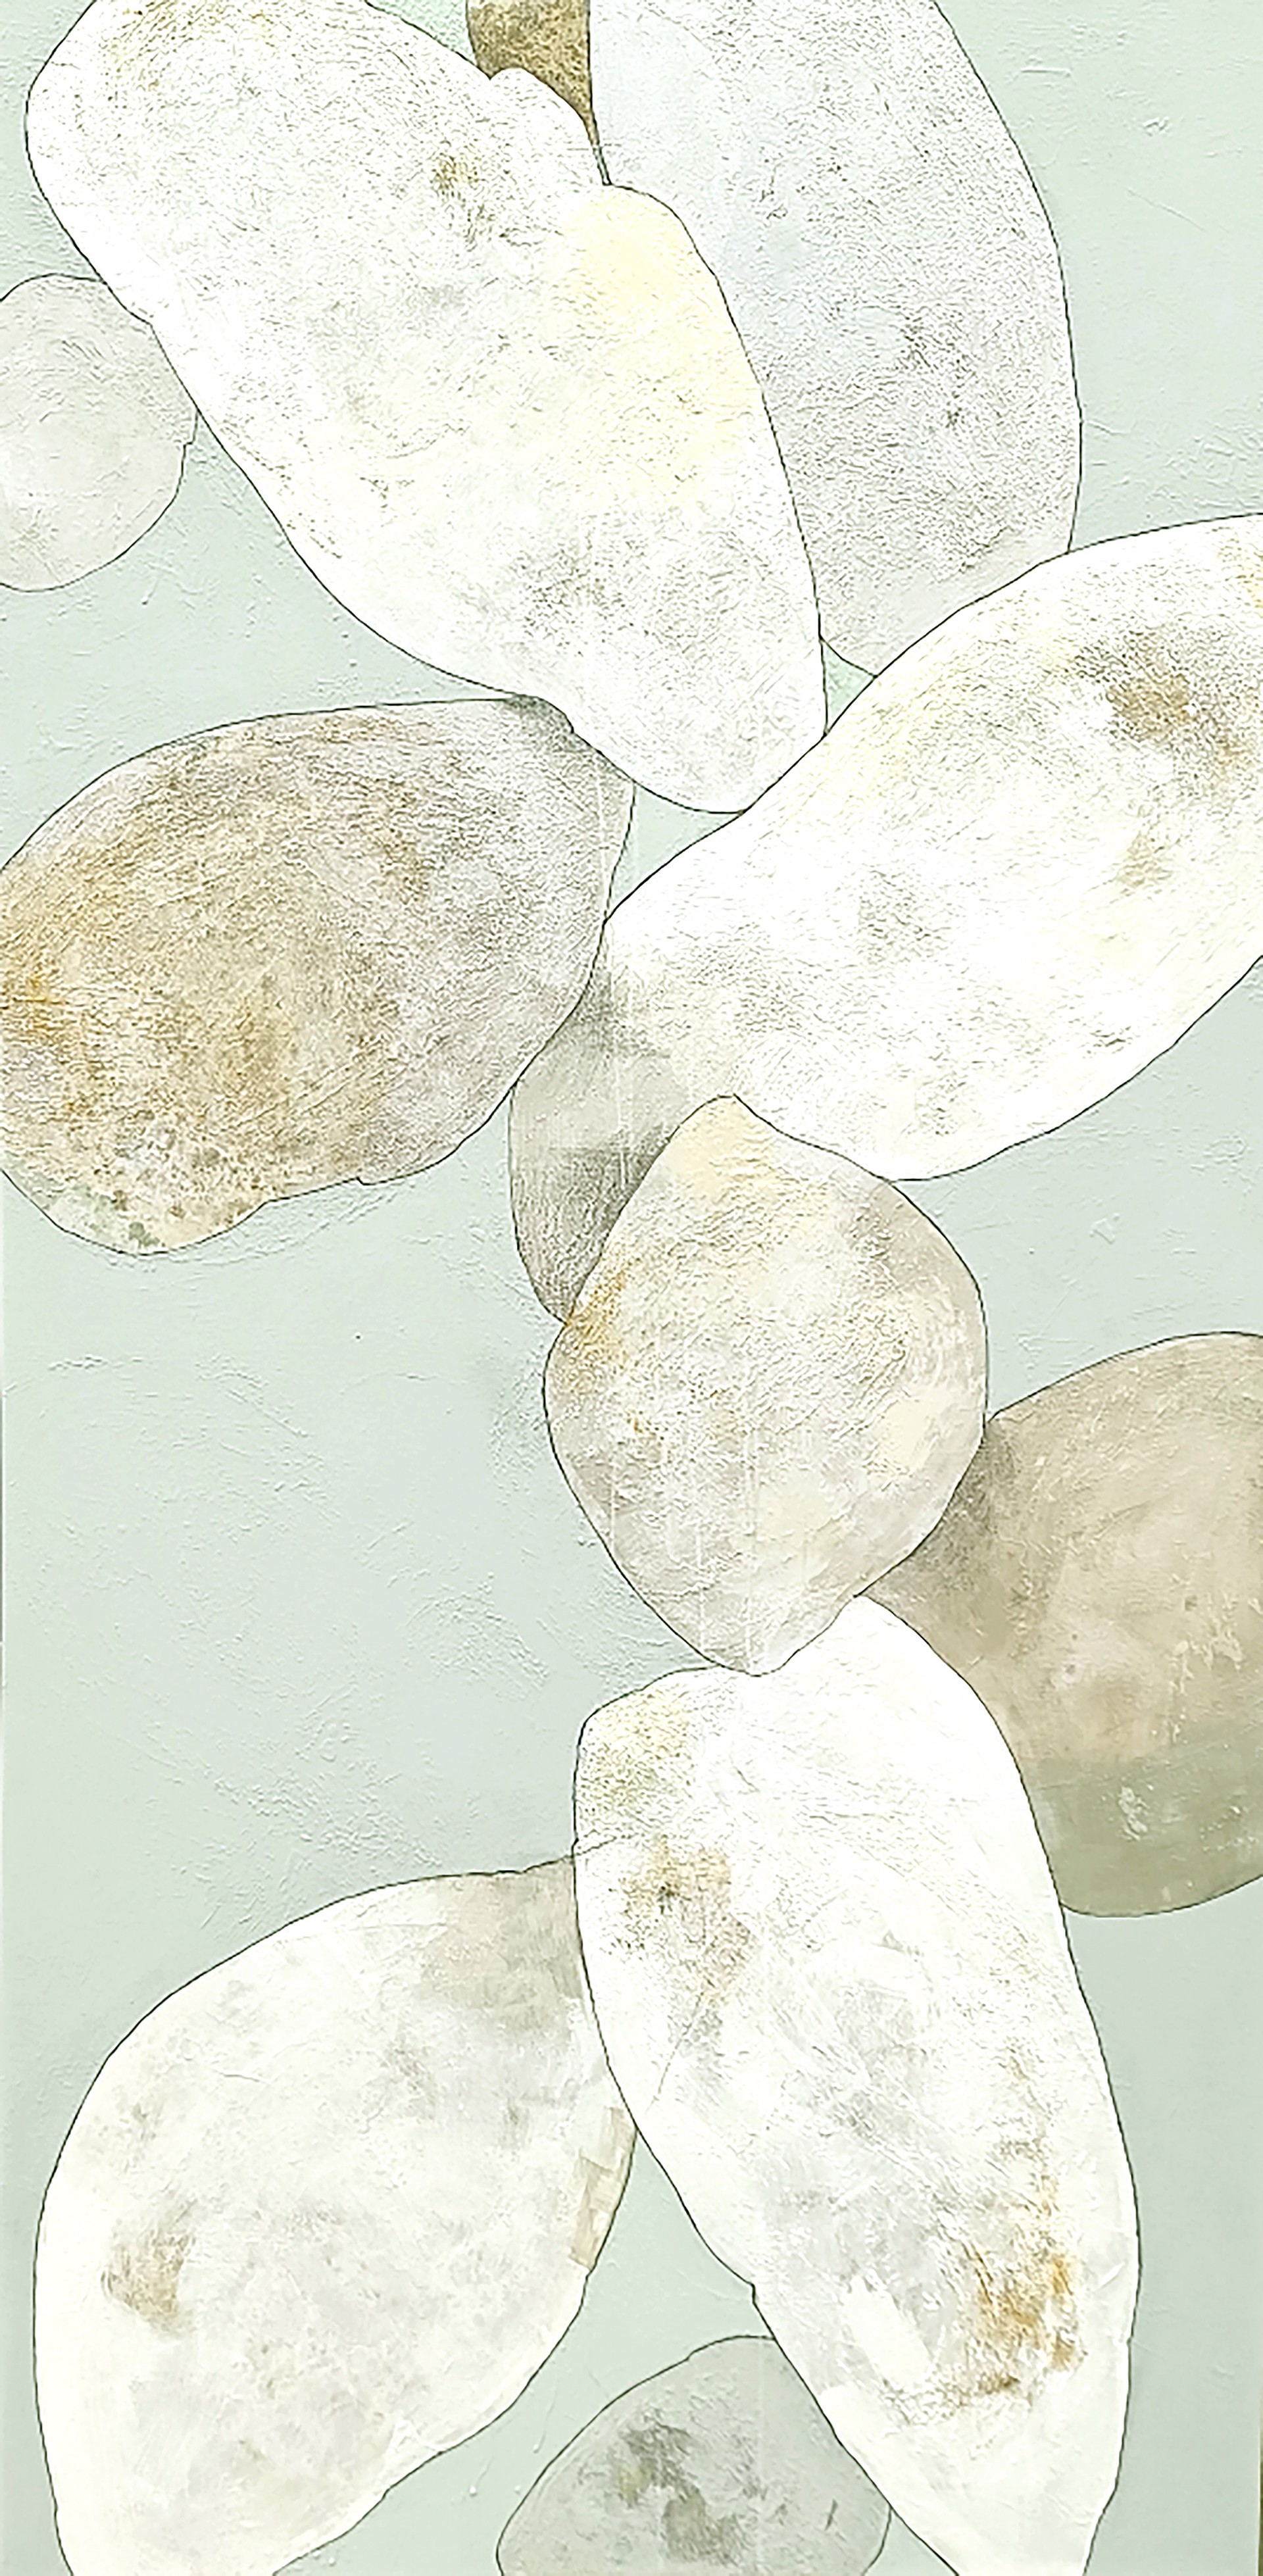 Fragments [Coral and Sea Glass] by Meredith Pardue